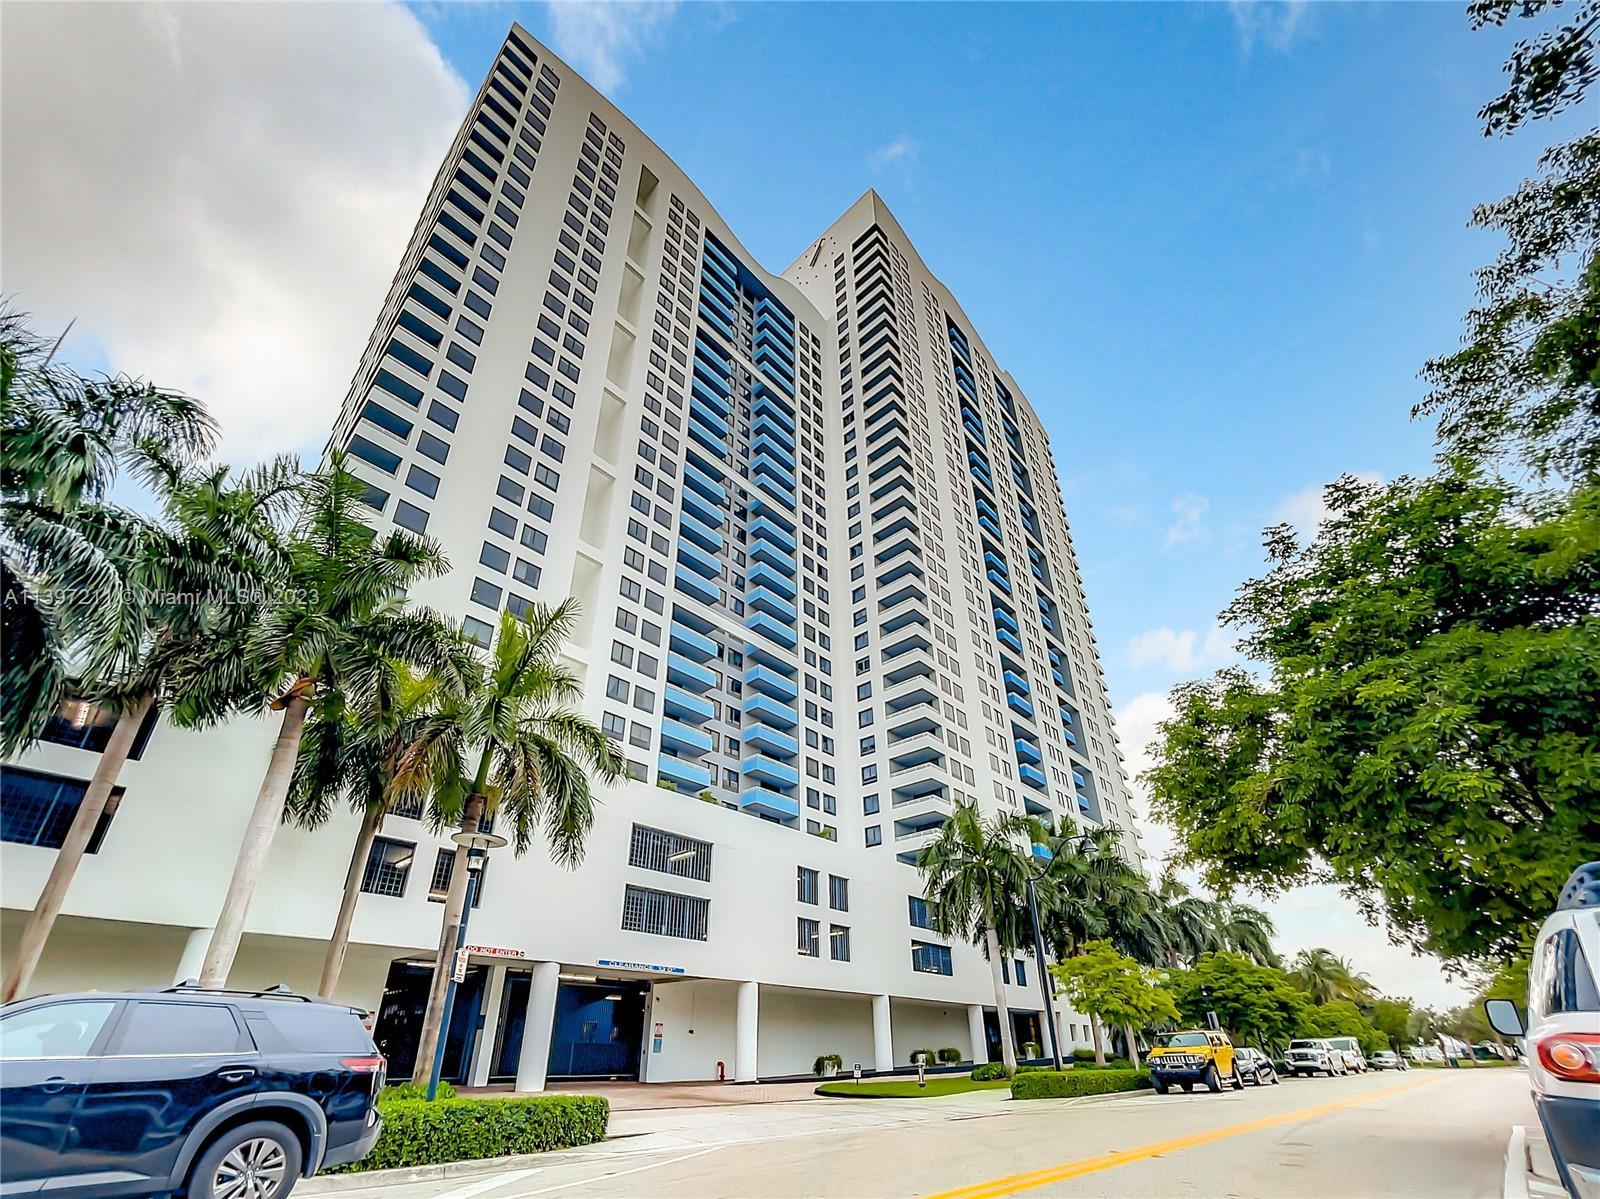 Experience luxury living at the Waverly in Miami Beach! This spacious 2-bed, 2-bath condo offers swe